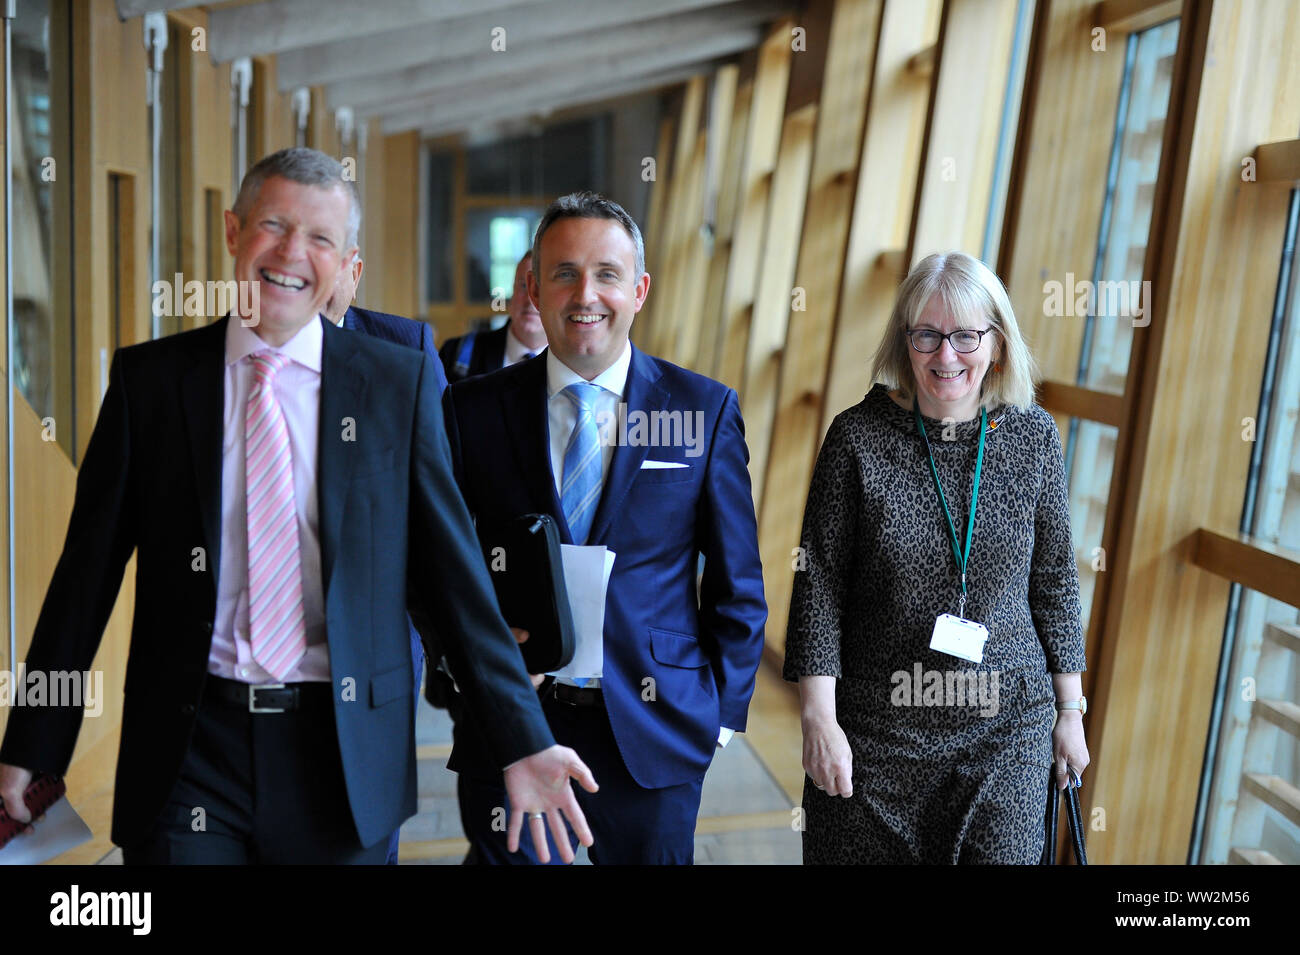 Edinburgh, UK. 12th Sep, 2019. Pictured: (left-right) Wilie Rennie MSP - Leader of the Scottish Liberal Democrat Party; Alex Cole-Hamilton MSP; Beatrice Wishart MSP - newly elected MSP for Shetland. First session of First Ministers Questions as the Scottish Parliament tries to steer a path through the fallout of the latest Brexit mess and prevent Scotland from leaving the EU. Credit: Colin Fisher/Alamy Live News Stock Photo